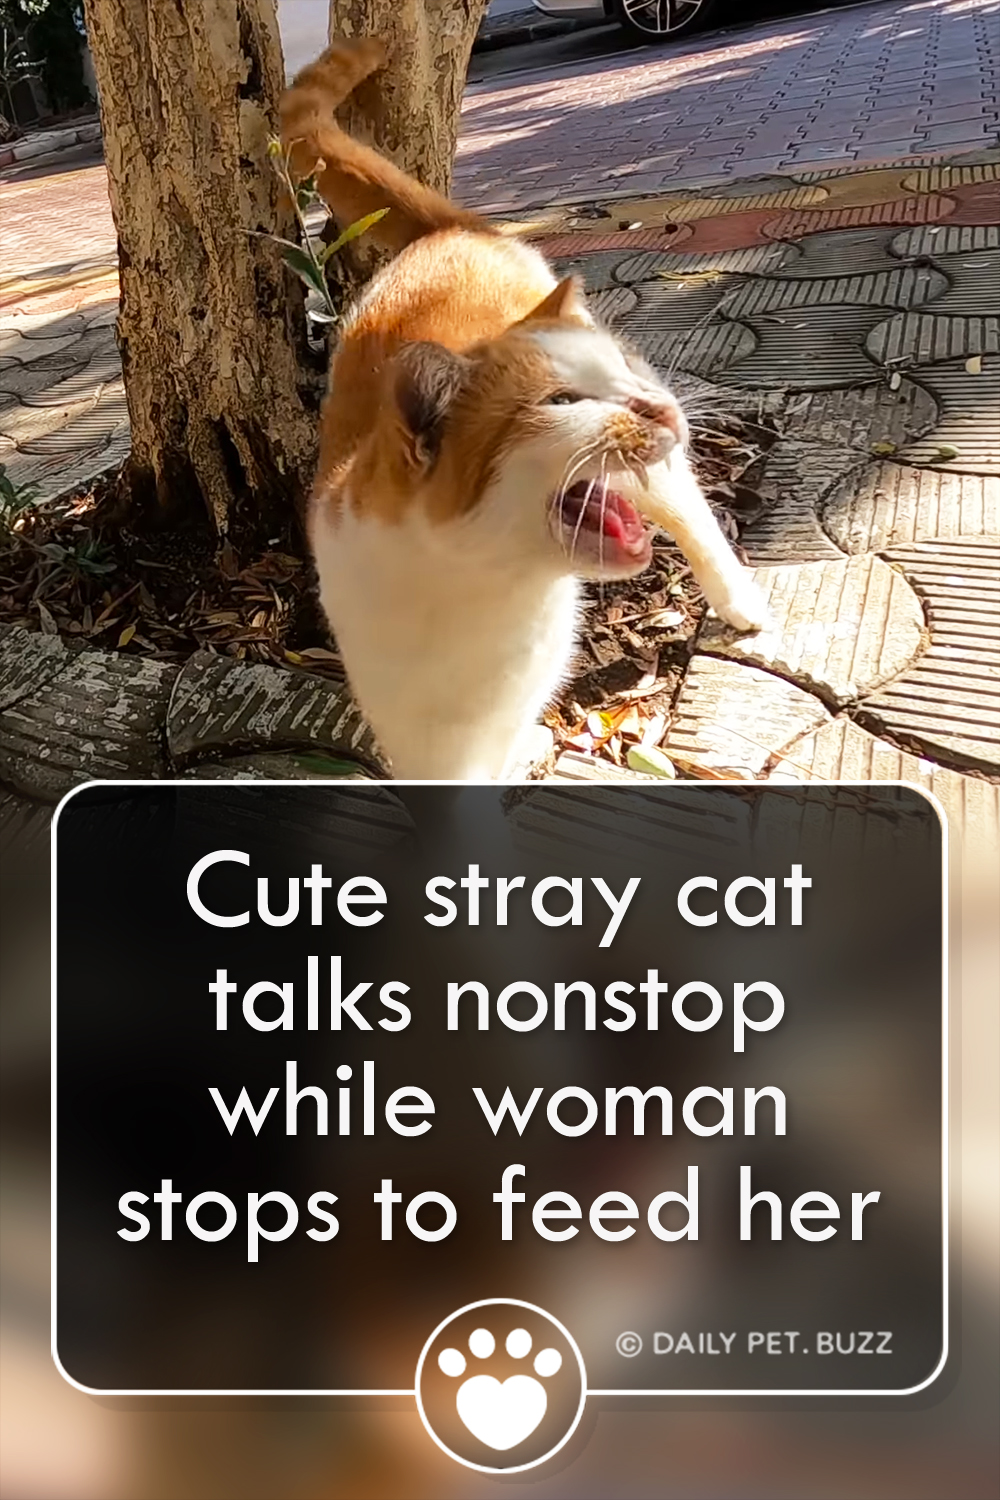 Cute stray cat talks nonstop while woman stops to feed her